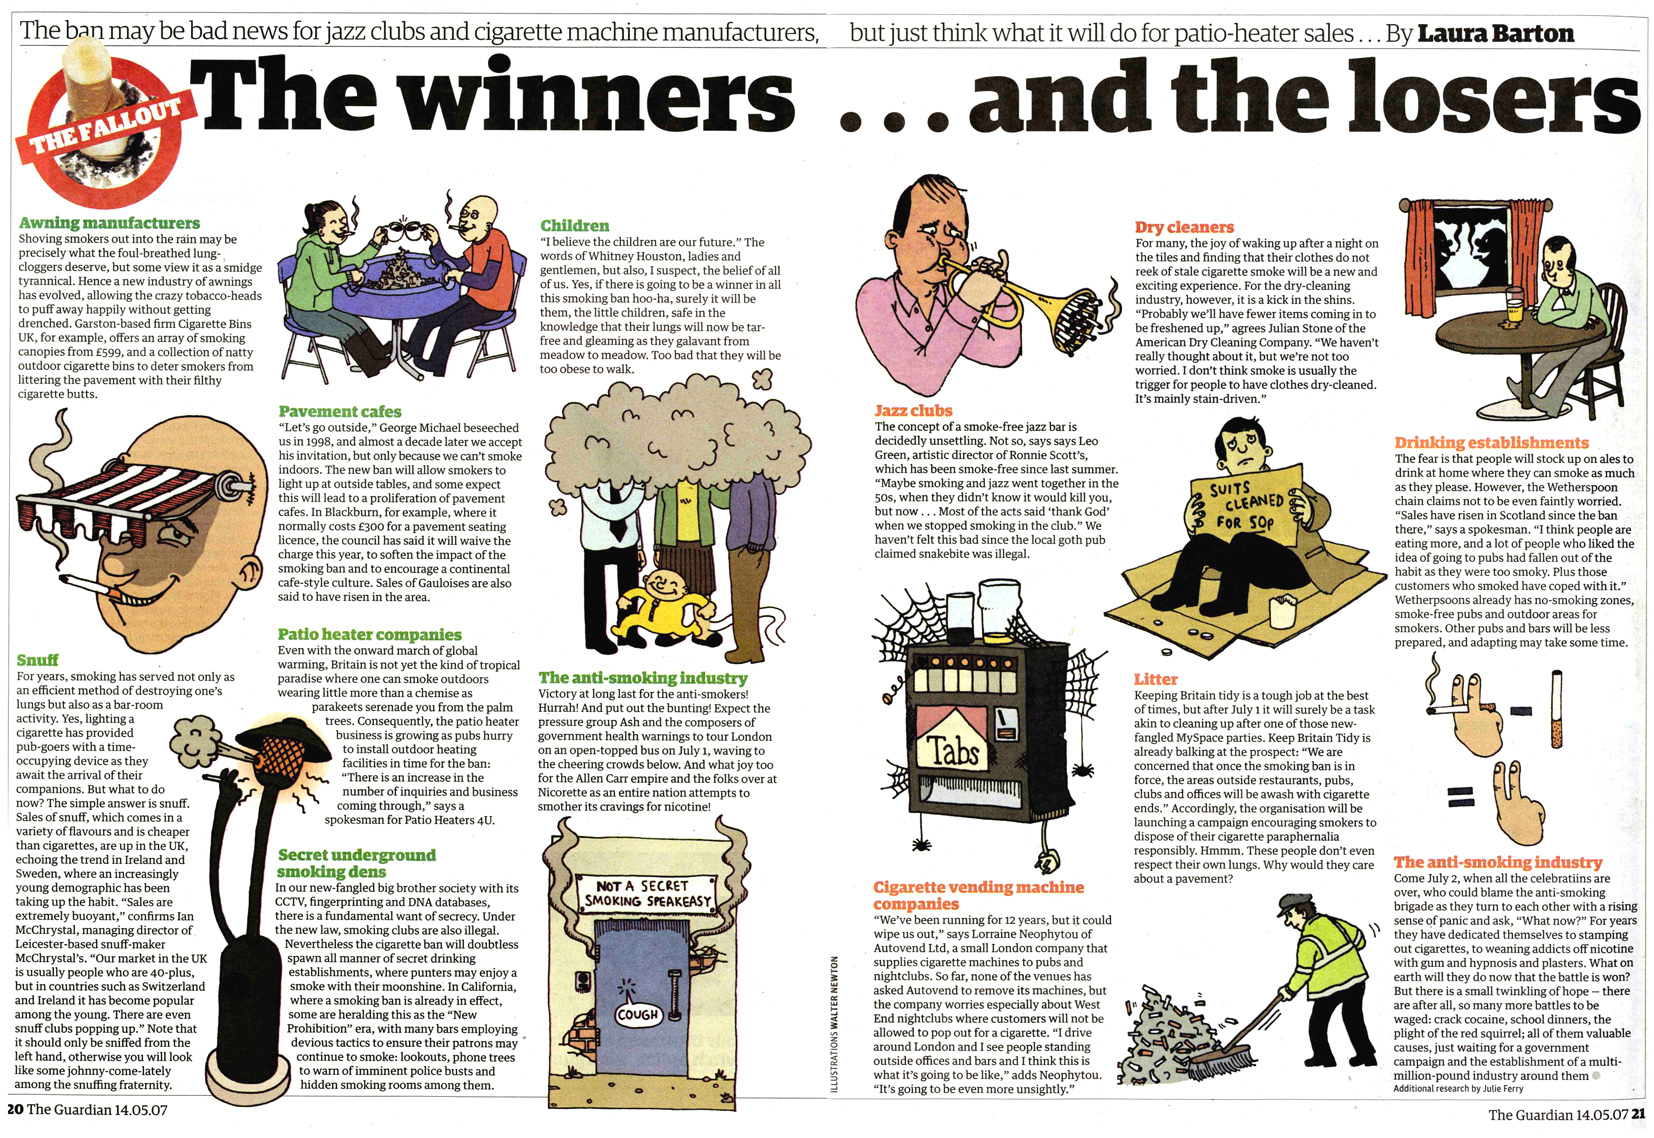 Winners And Losers Of The Smoking Ban DPS / The Guardian